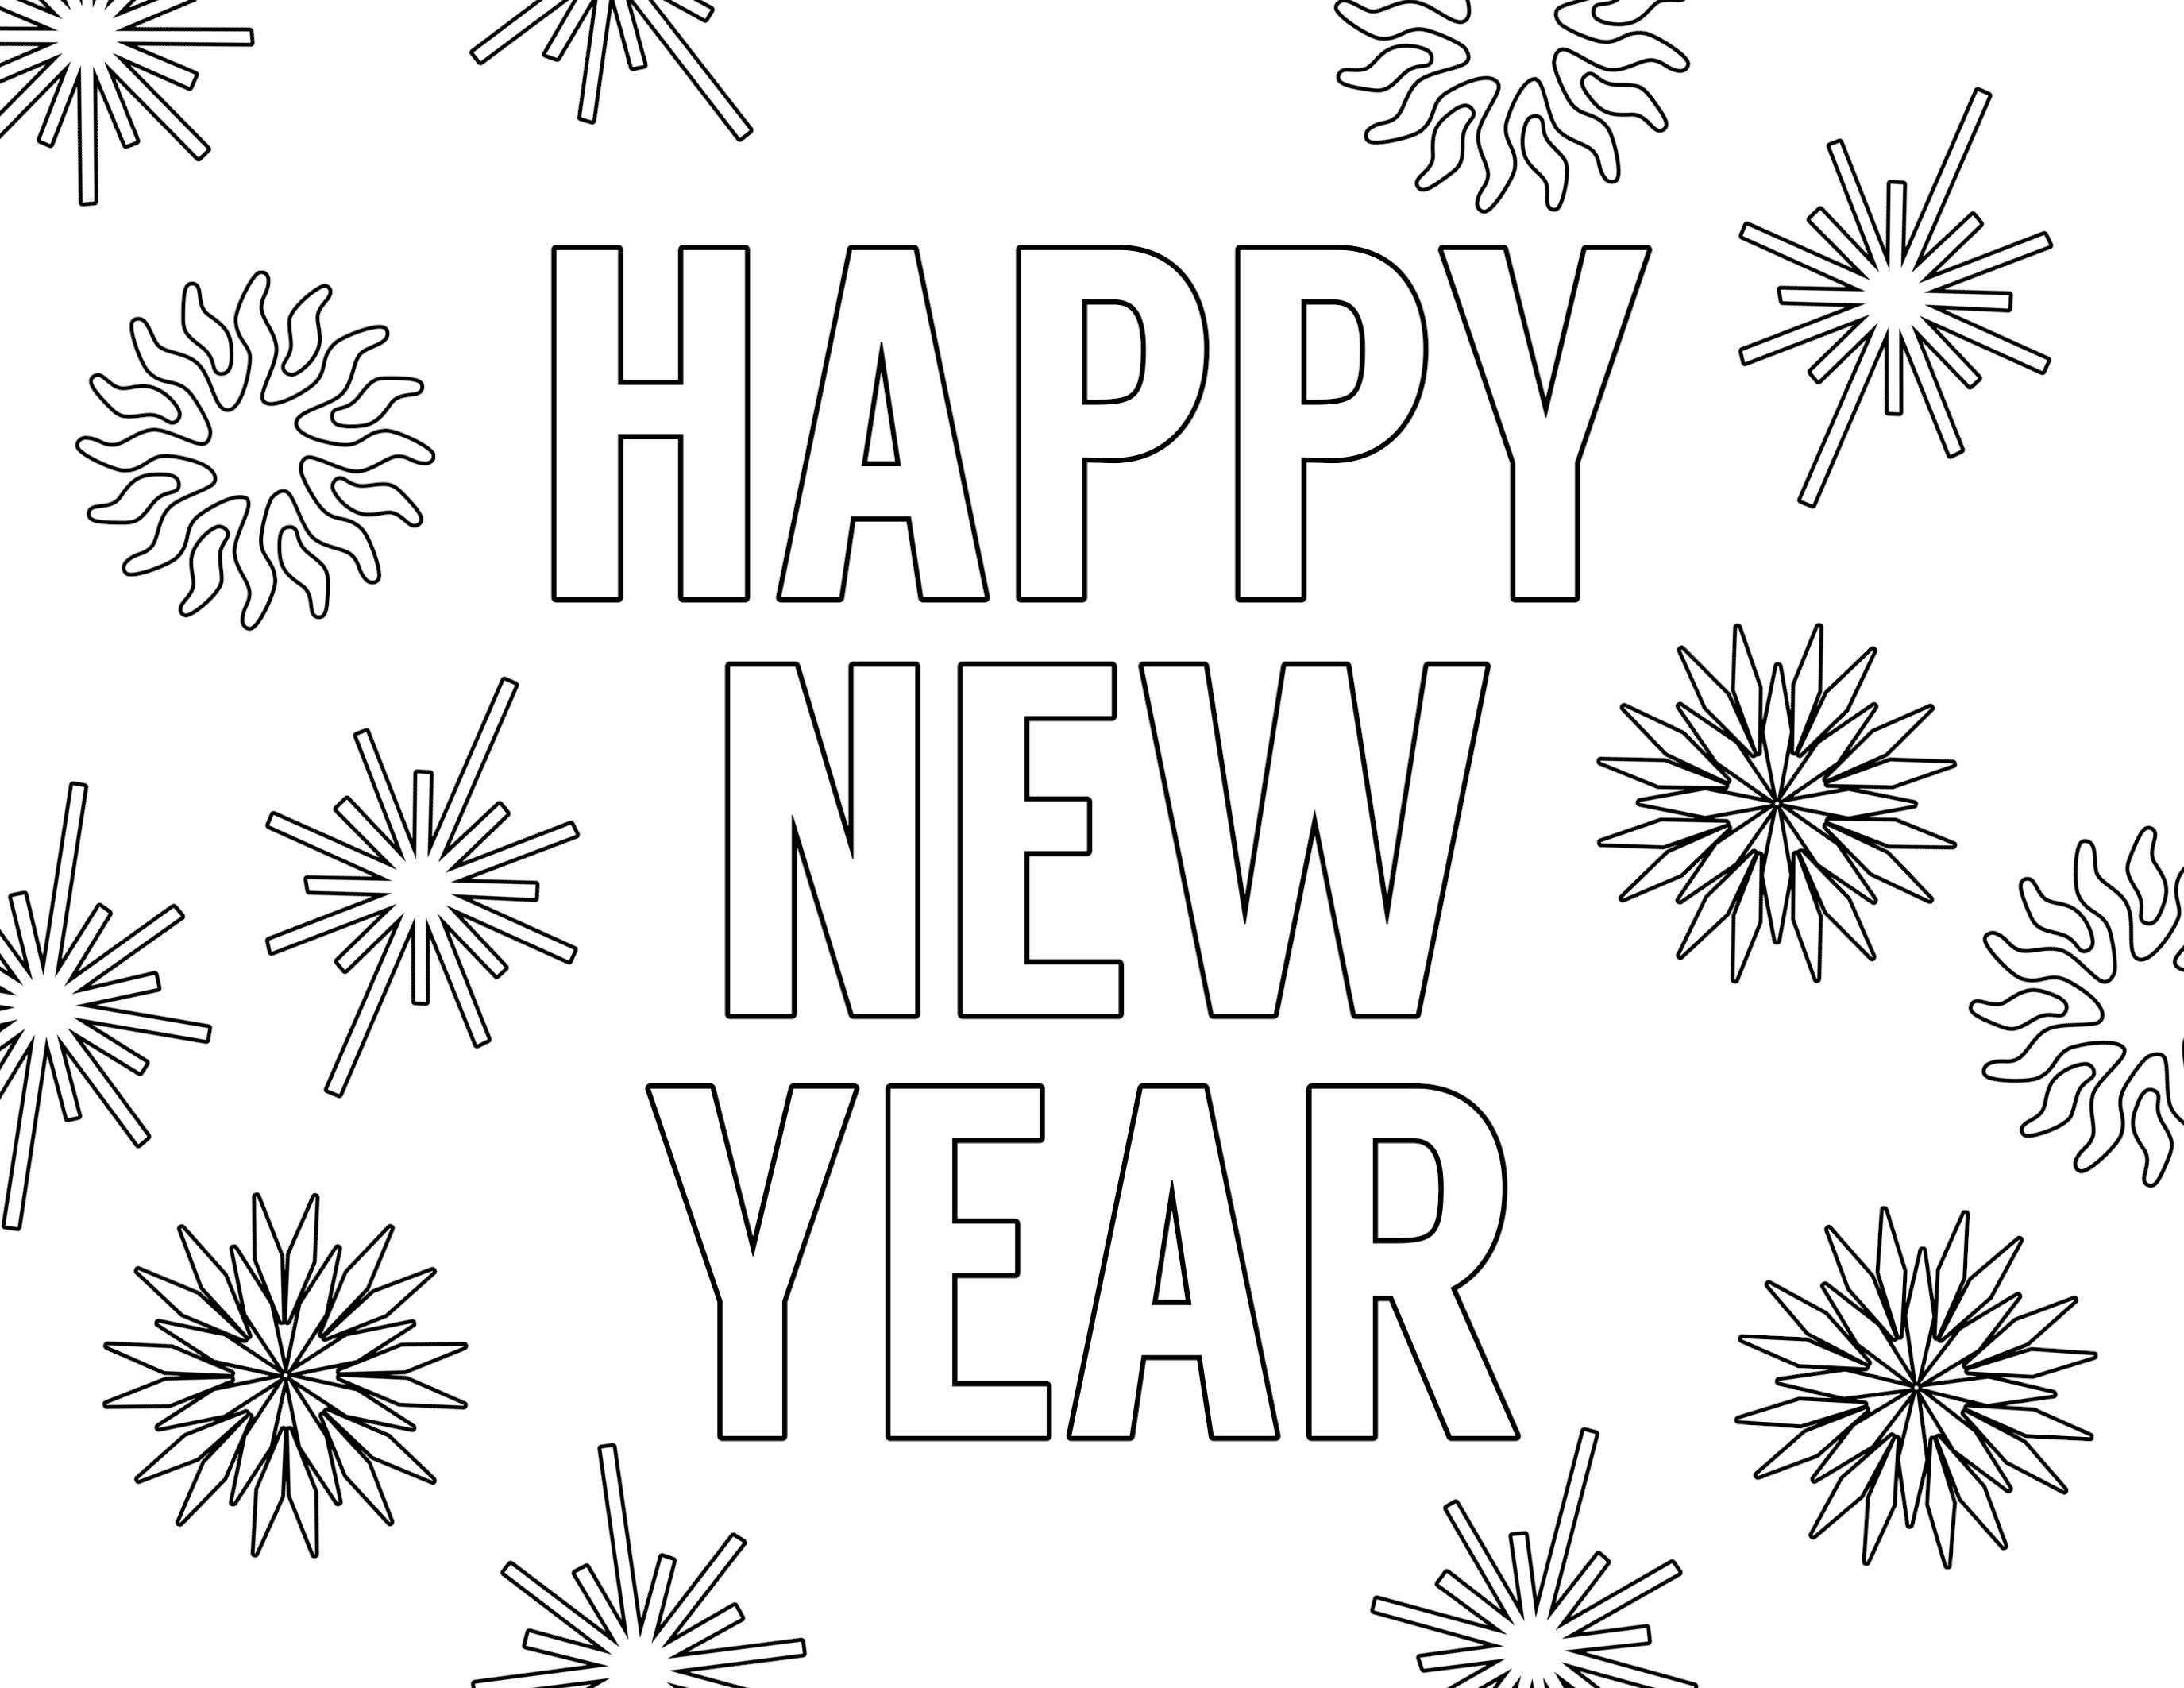 Happy New Year Coloring Pages Free Printable - Paper Trail Design - New Year Coloring Pages Free Printables